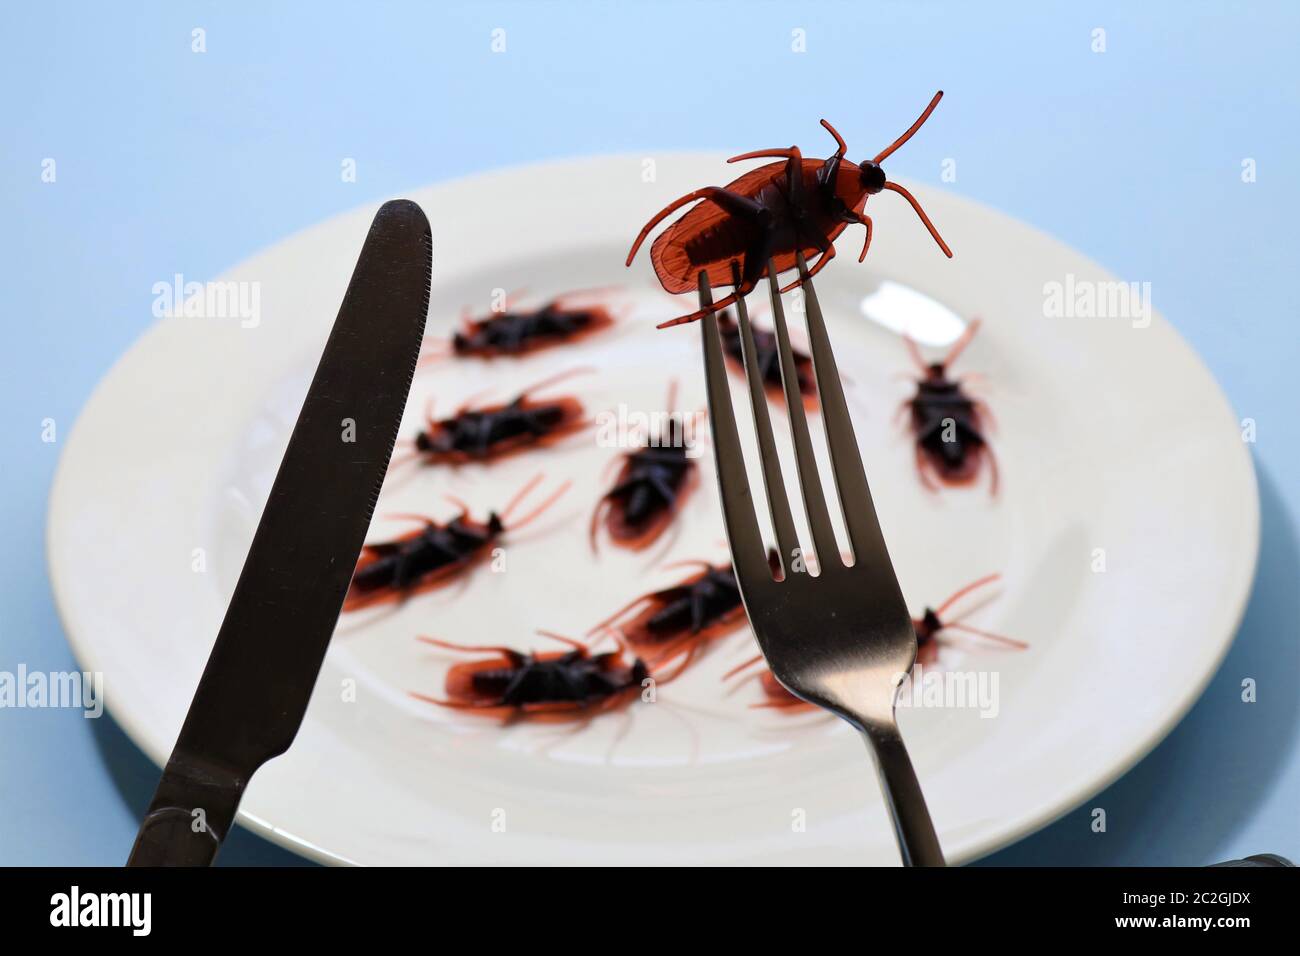 Bugs on a plate.Insects as food or edible insects are insect species used for human consumption either whole or as an ingredient in processed foods. Stock Photo